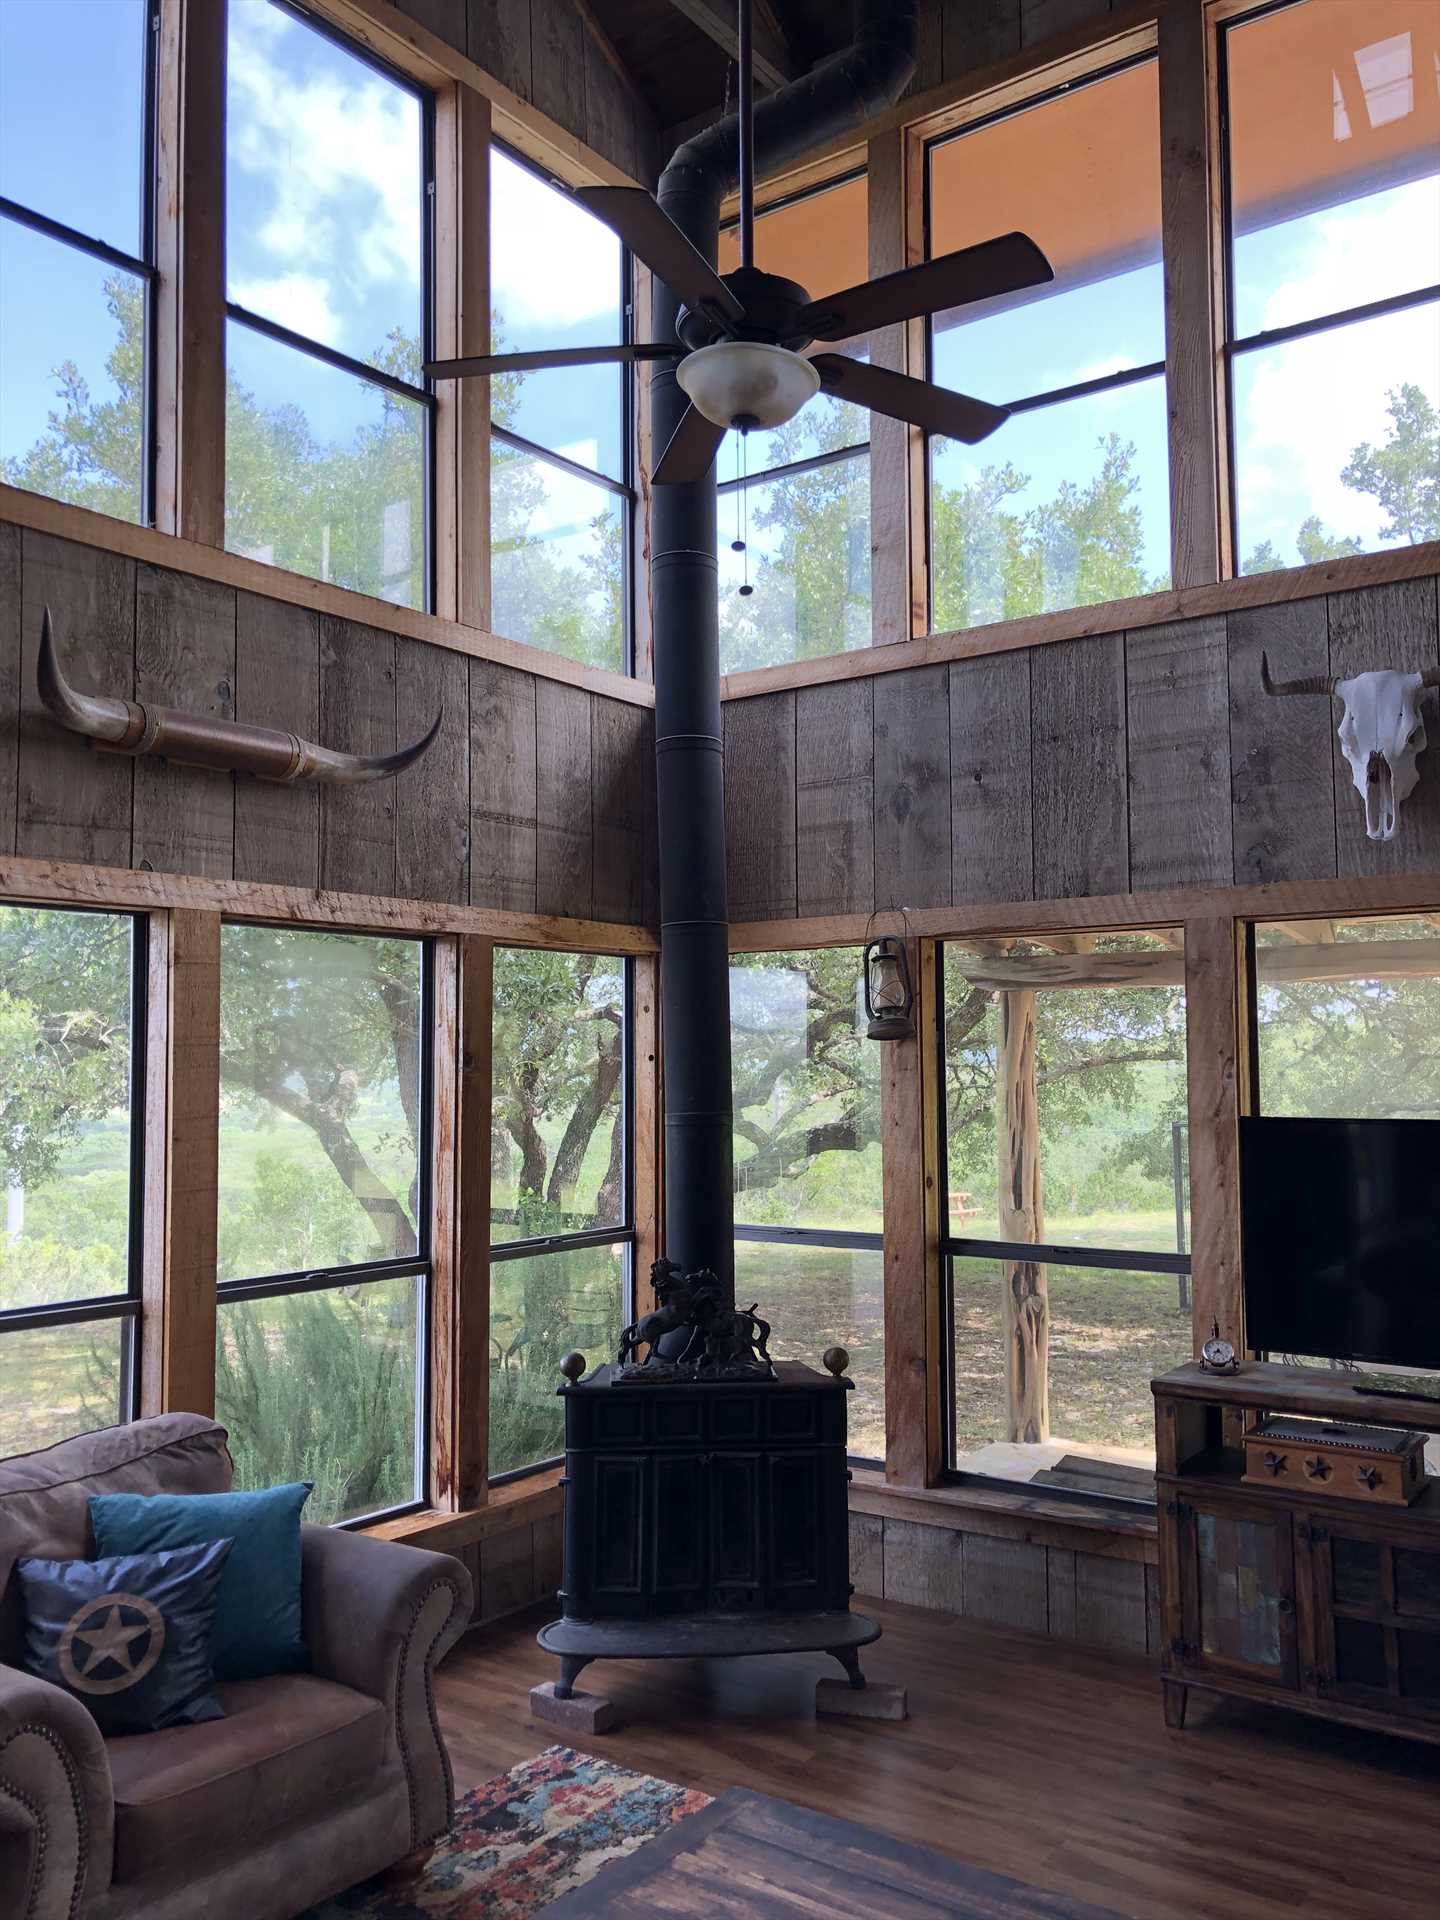                                                 The spacious living area at the Bluff House offers breathtaking two-story windowed views of the Hill Country, along with the decorative charm of a wood stove (which is inoperable at this time).